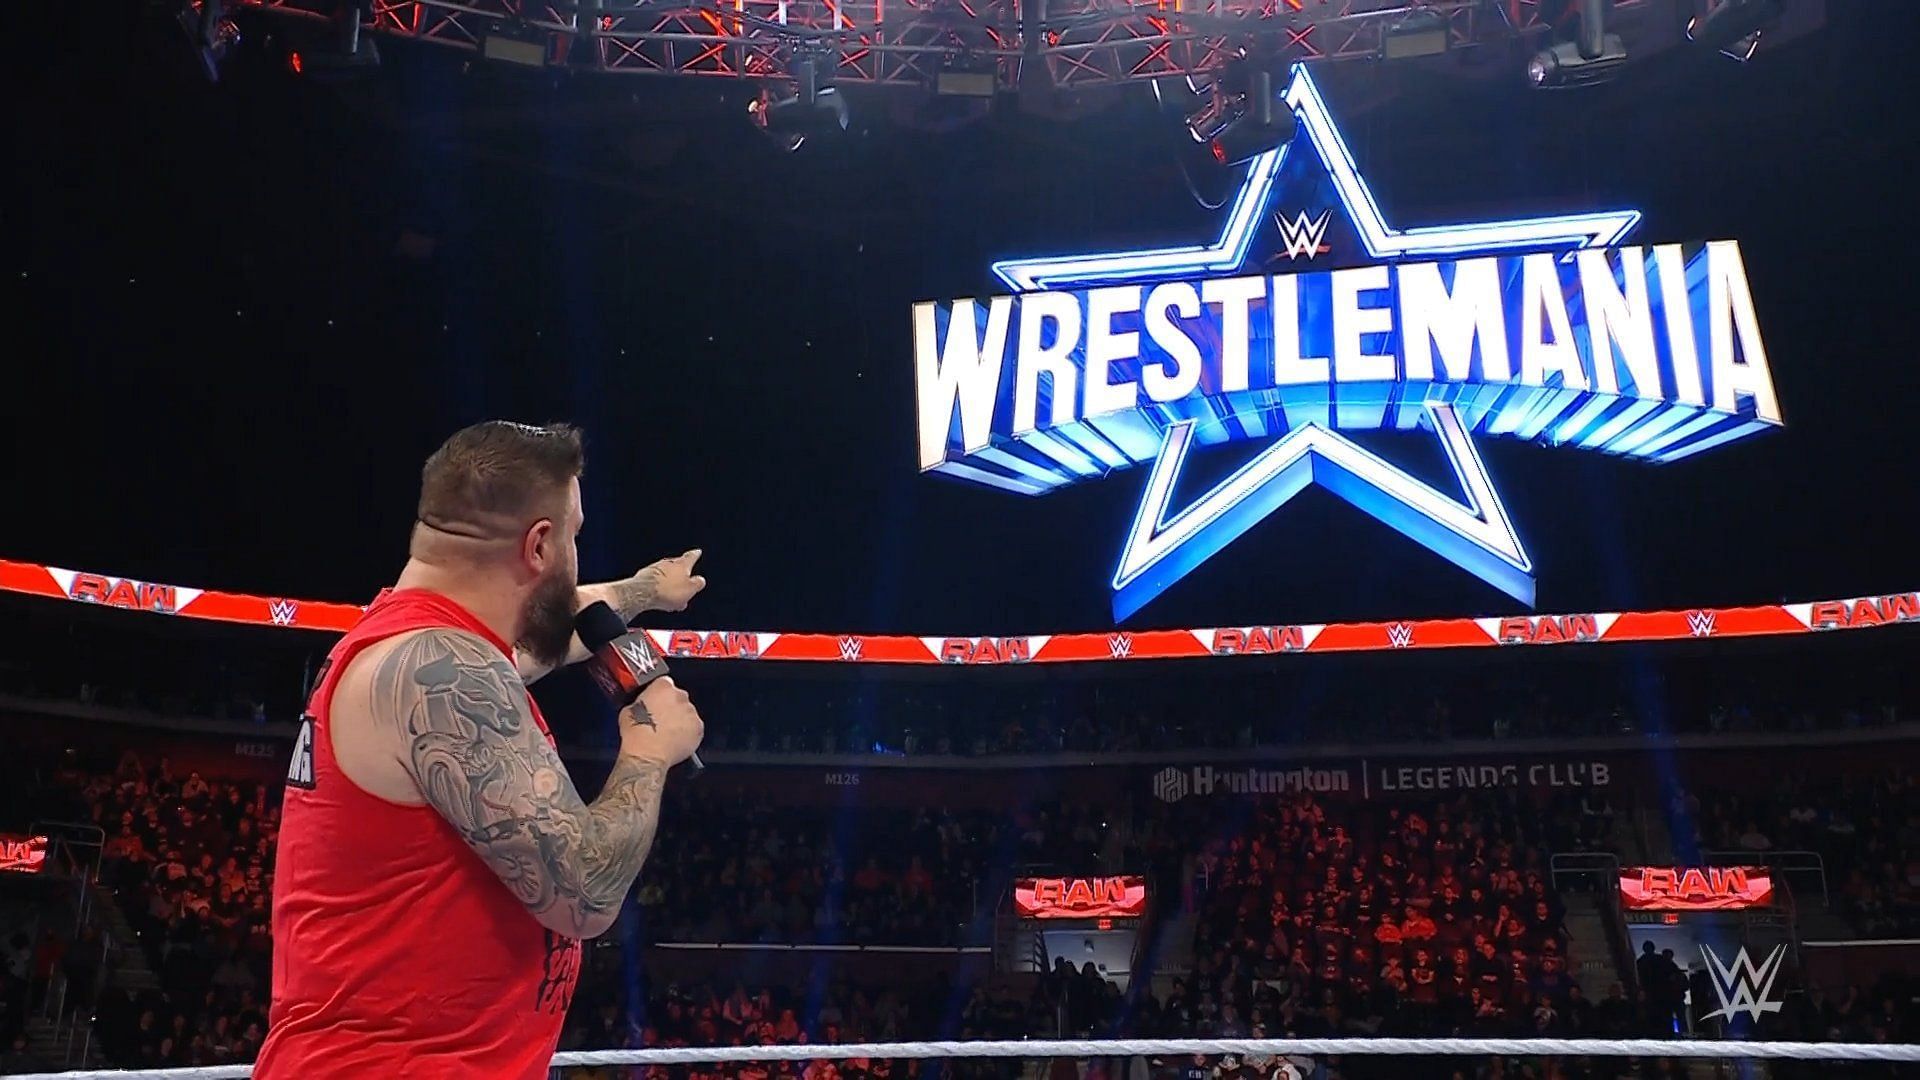 Kevin Owens put on an incredible performance at WWE WrestleMania 38!